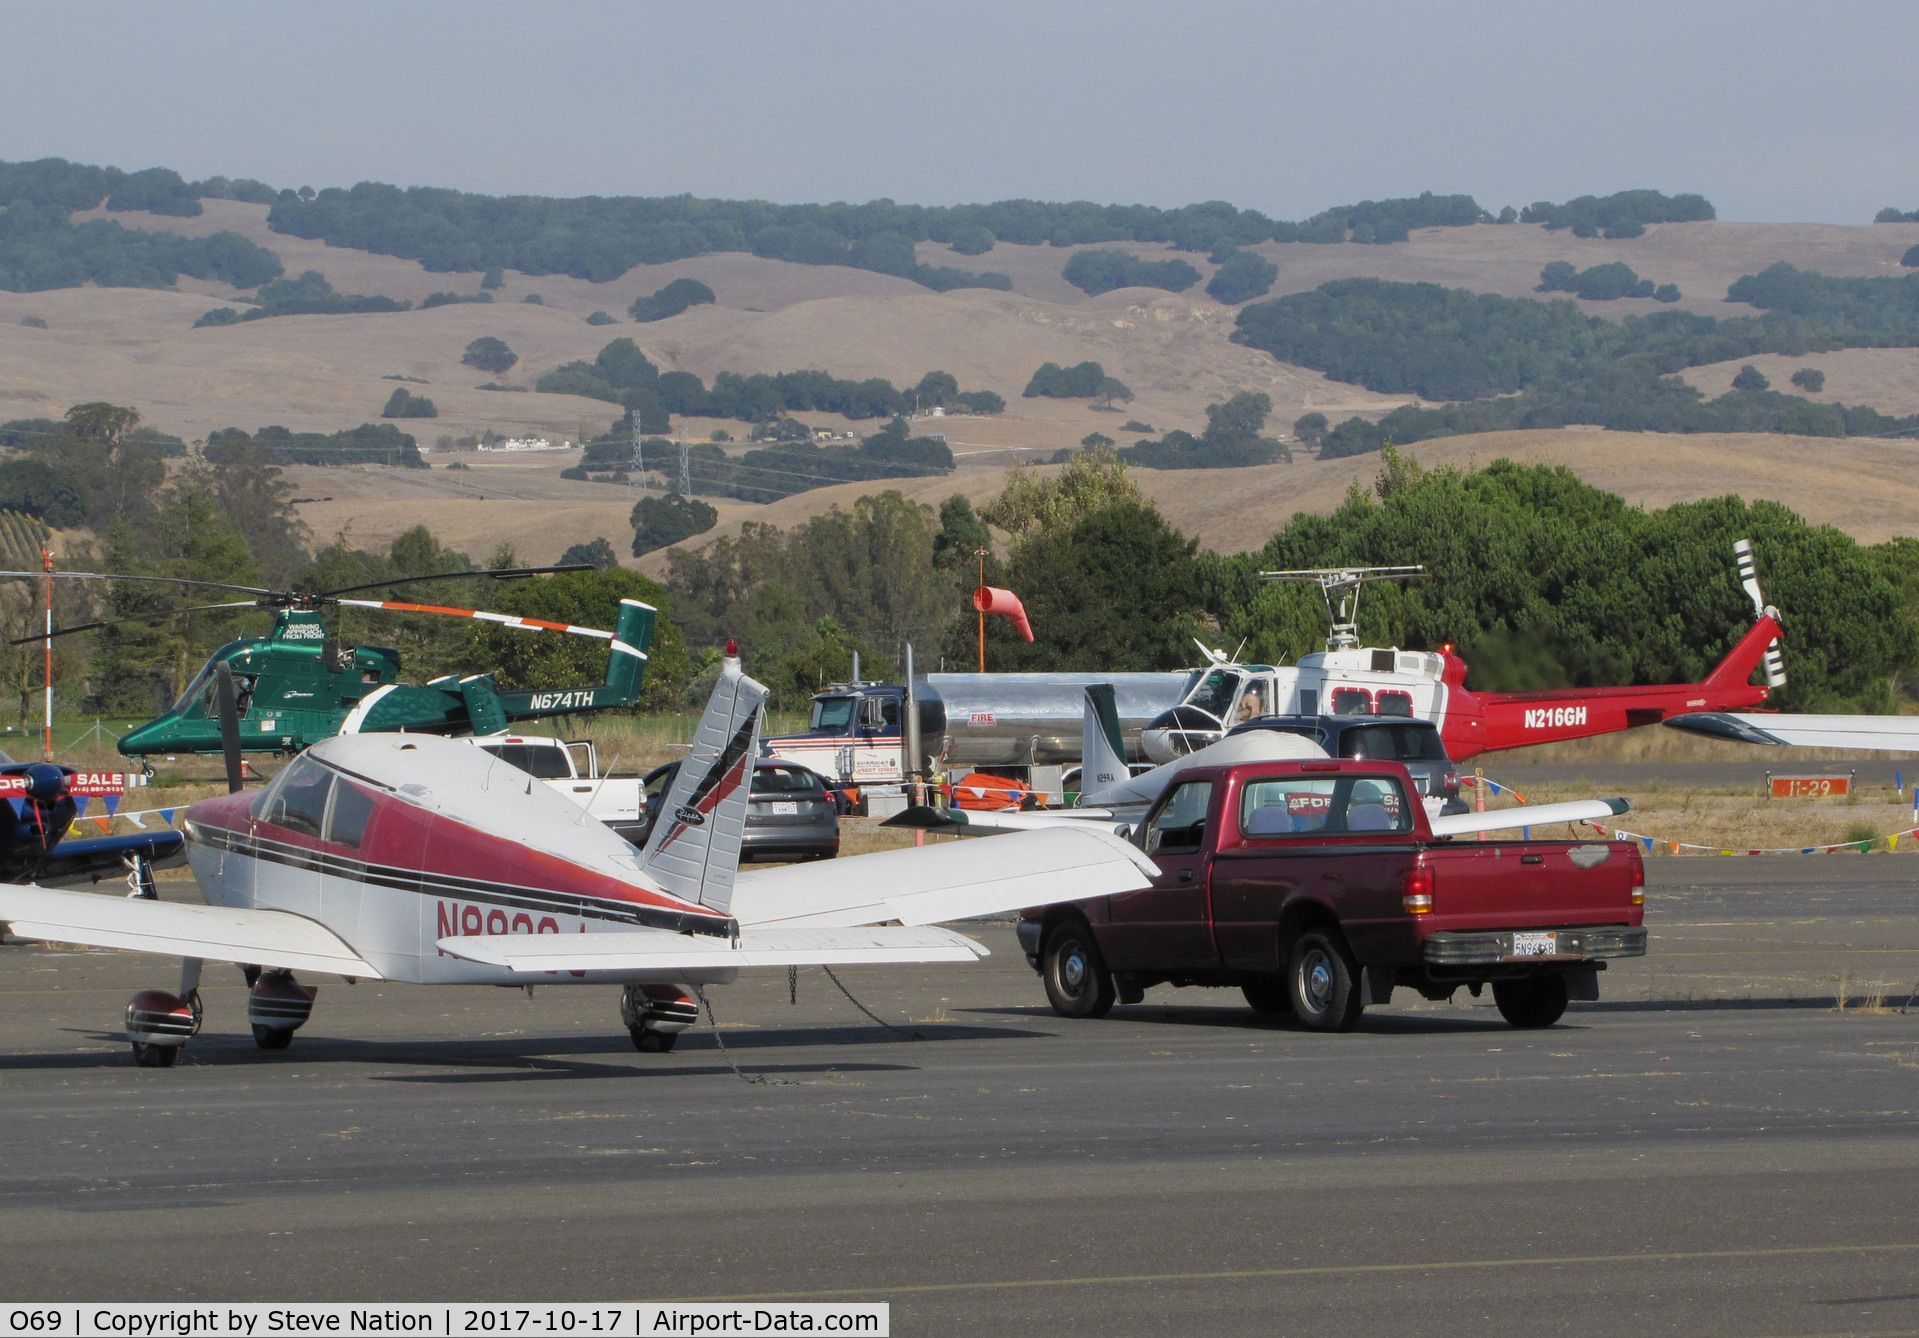 Petaluma Municipal Airport (O69) - Petaluma Municipal Airport, CA was closed to fixed wing operations for 10 days in October 2017 to support CAL FIRE contracted helicopters making drops on the devastating fires in Northern California ... kudos to airport manager Bob Patterson! 